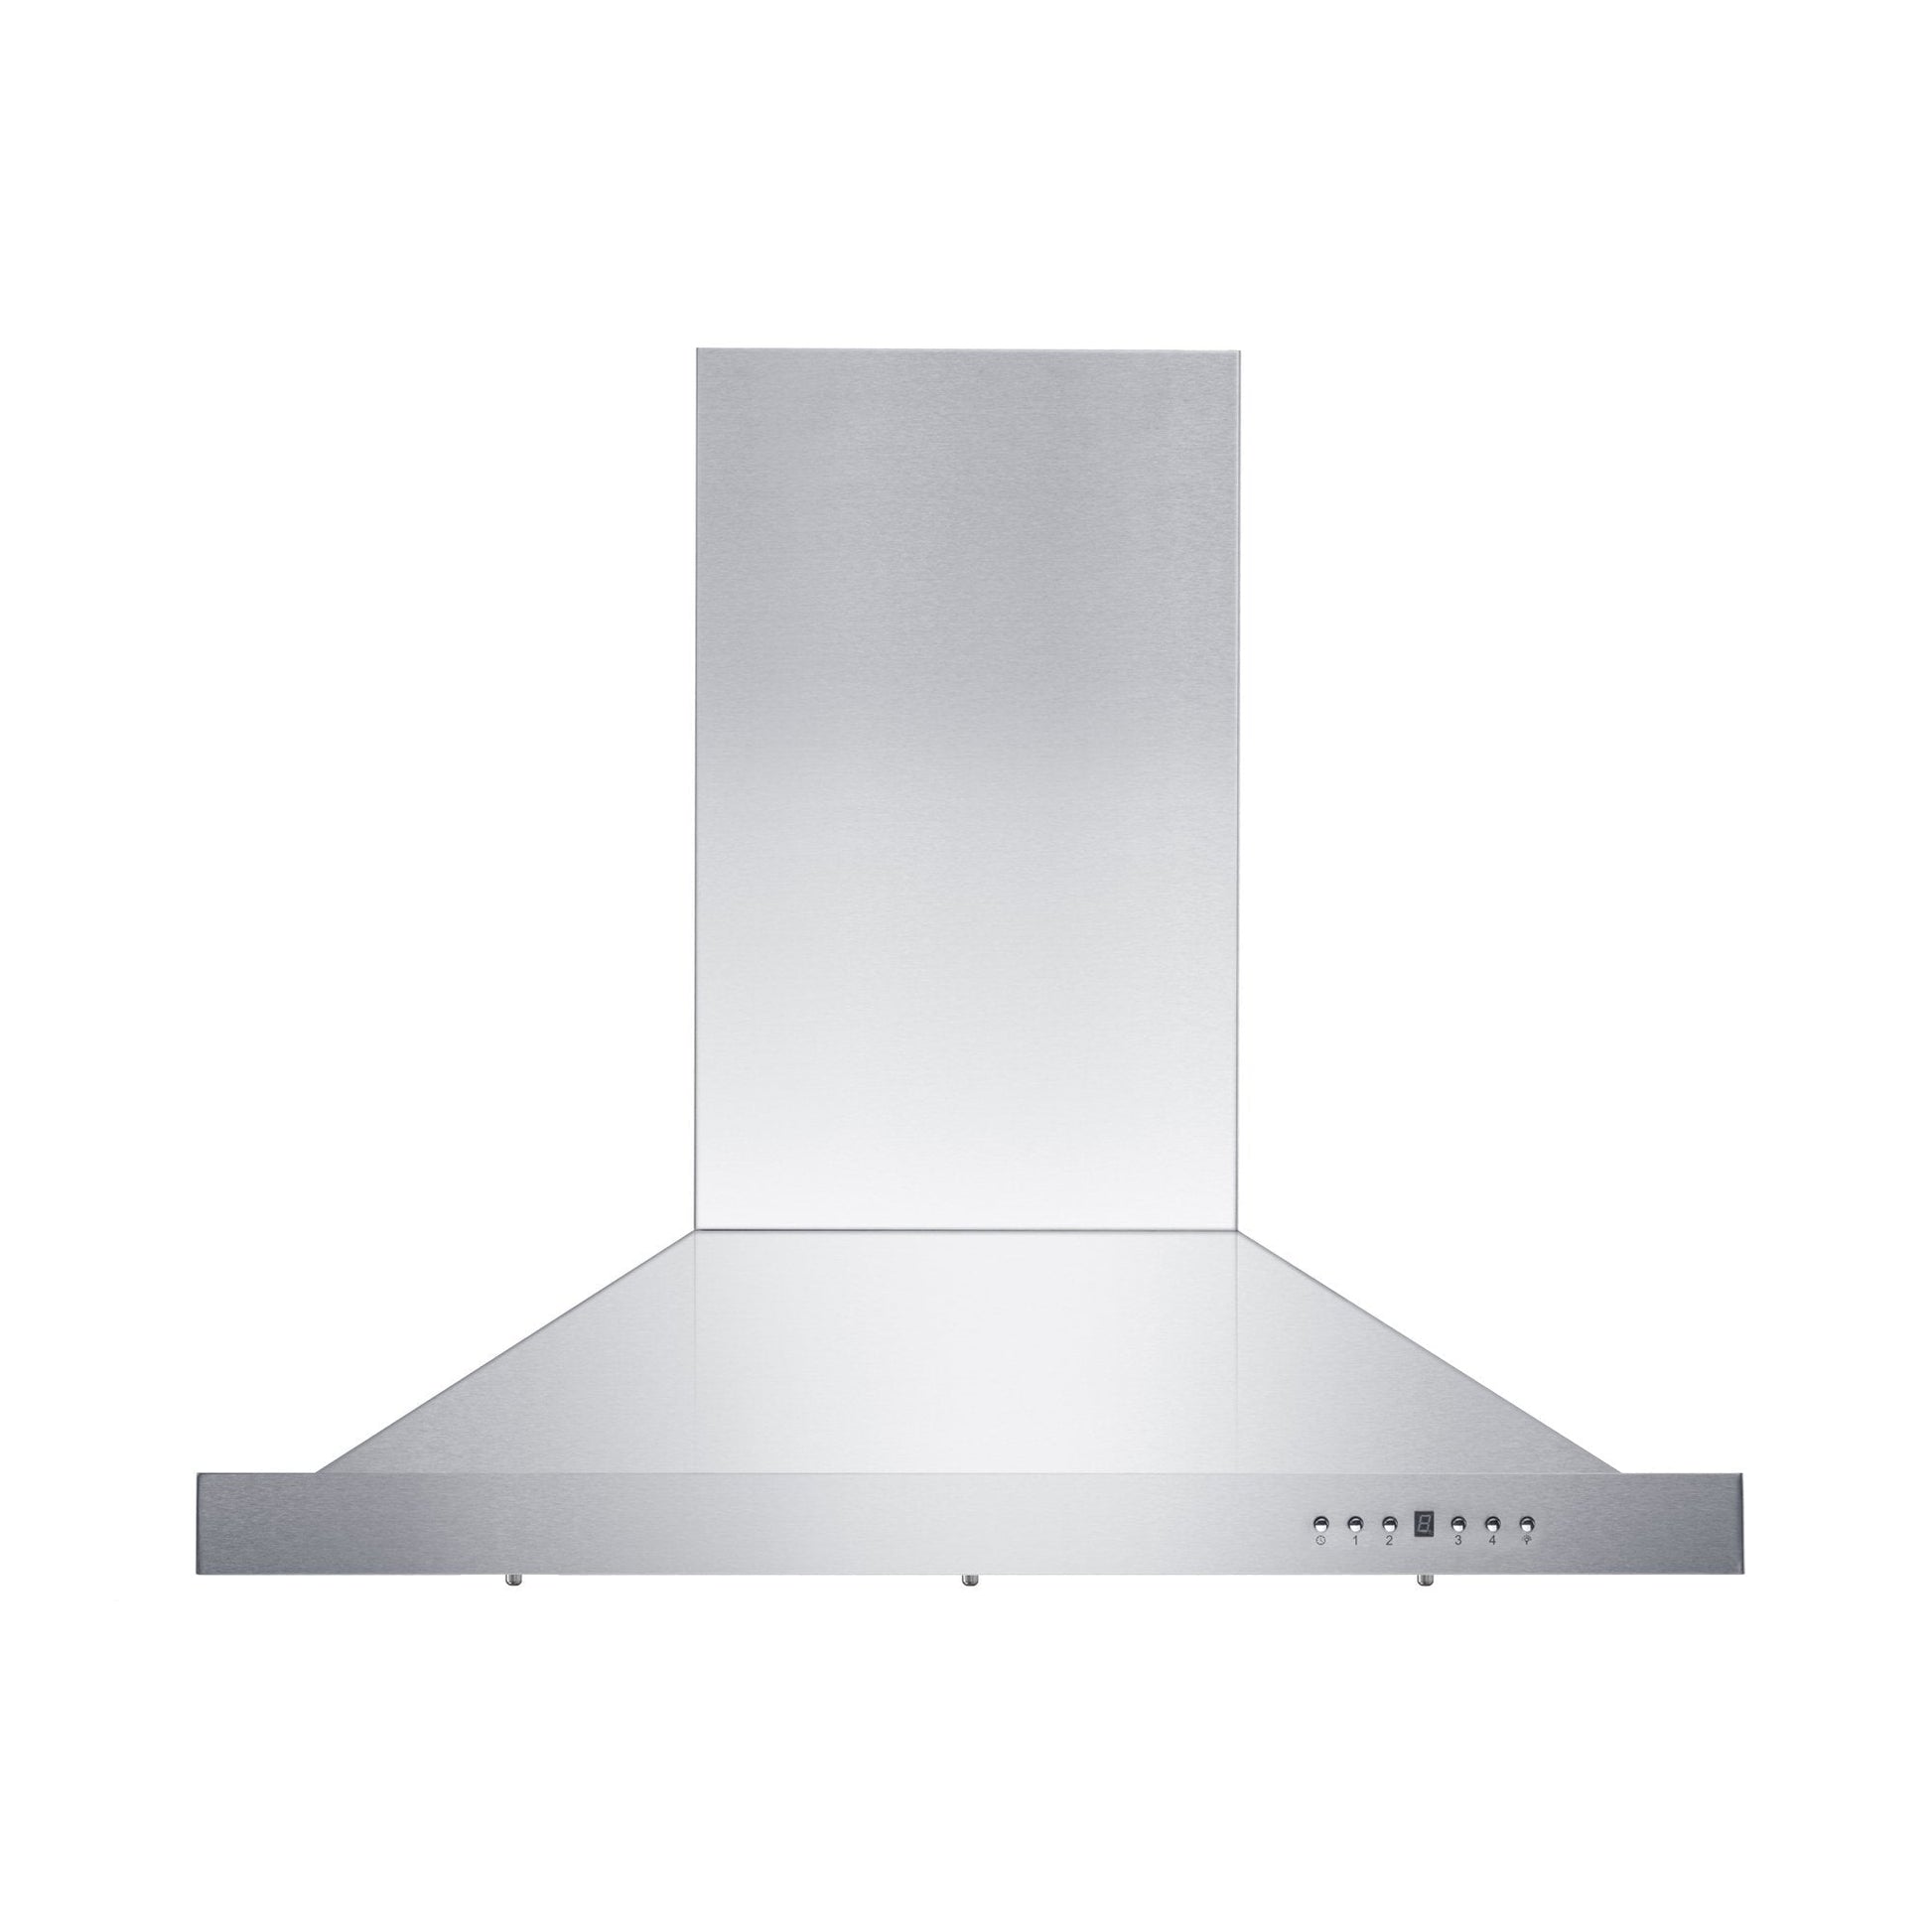 ZLINE Convertible Vent Island Mount Range Hood in Stainless Steel (GL2i) front with button panel and display.